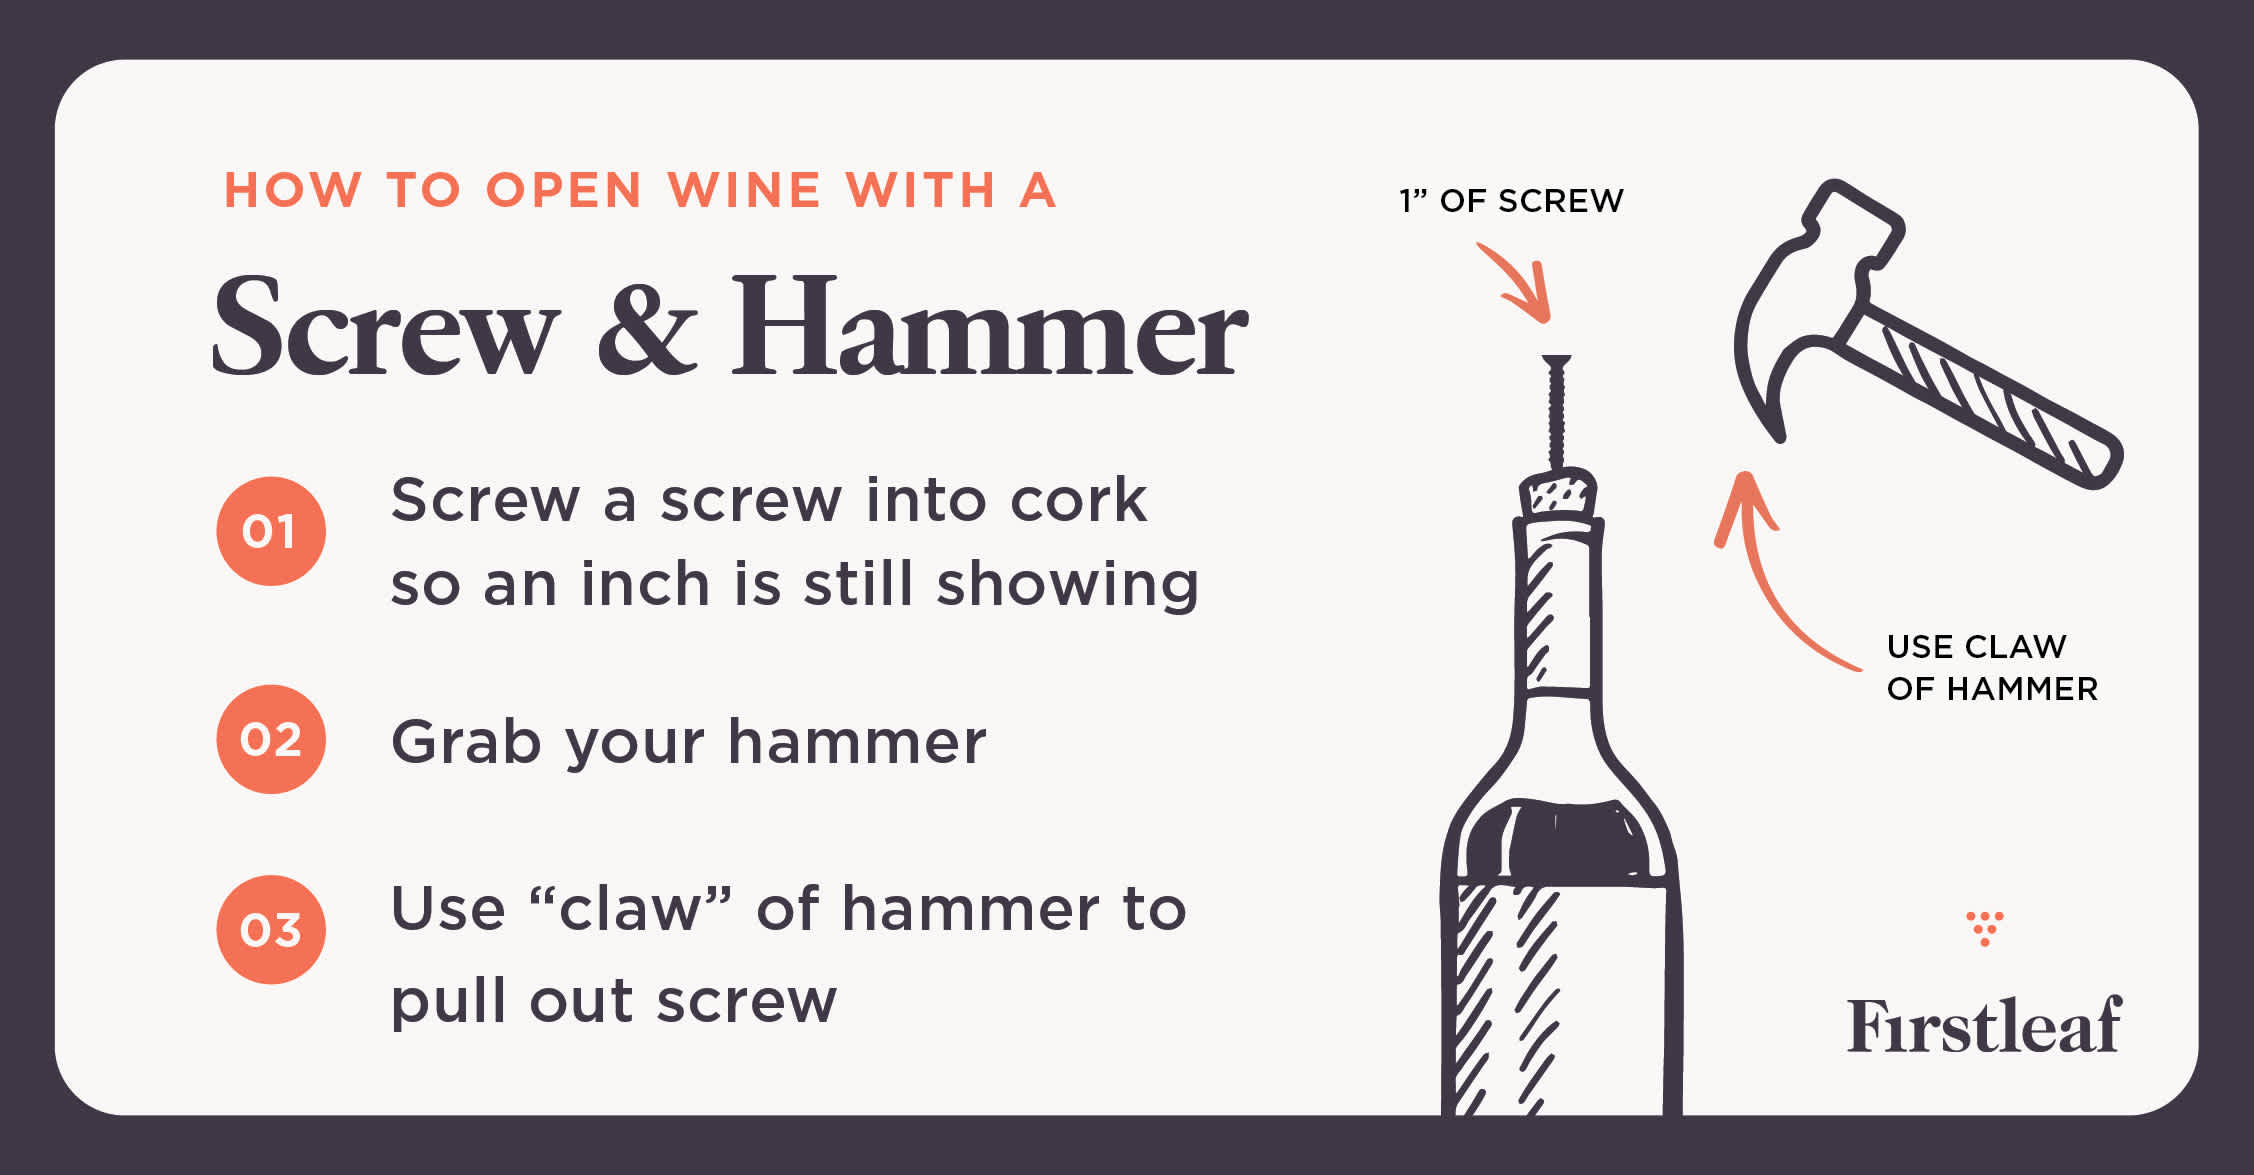 How to Open Wine with Screw&Hammer